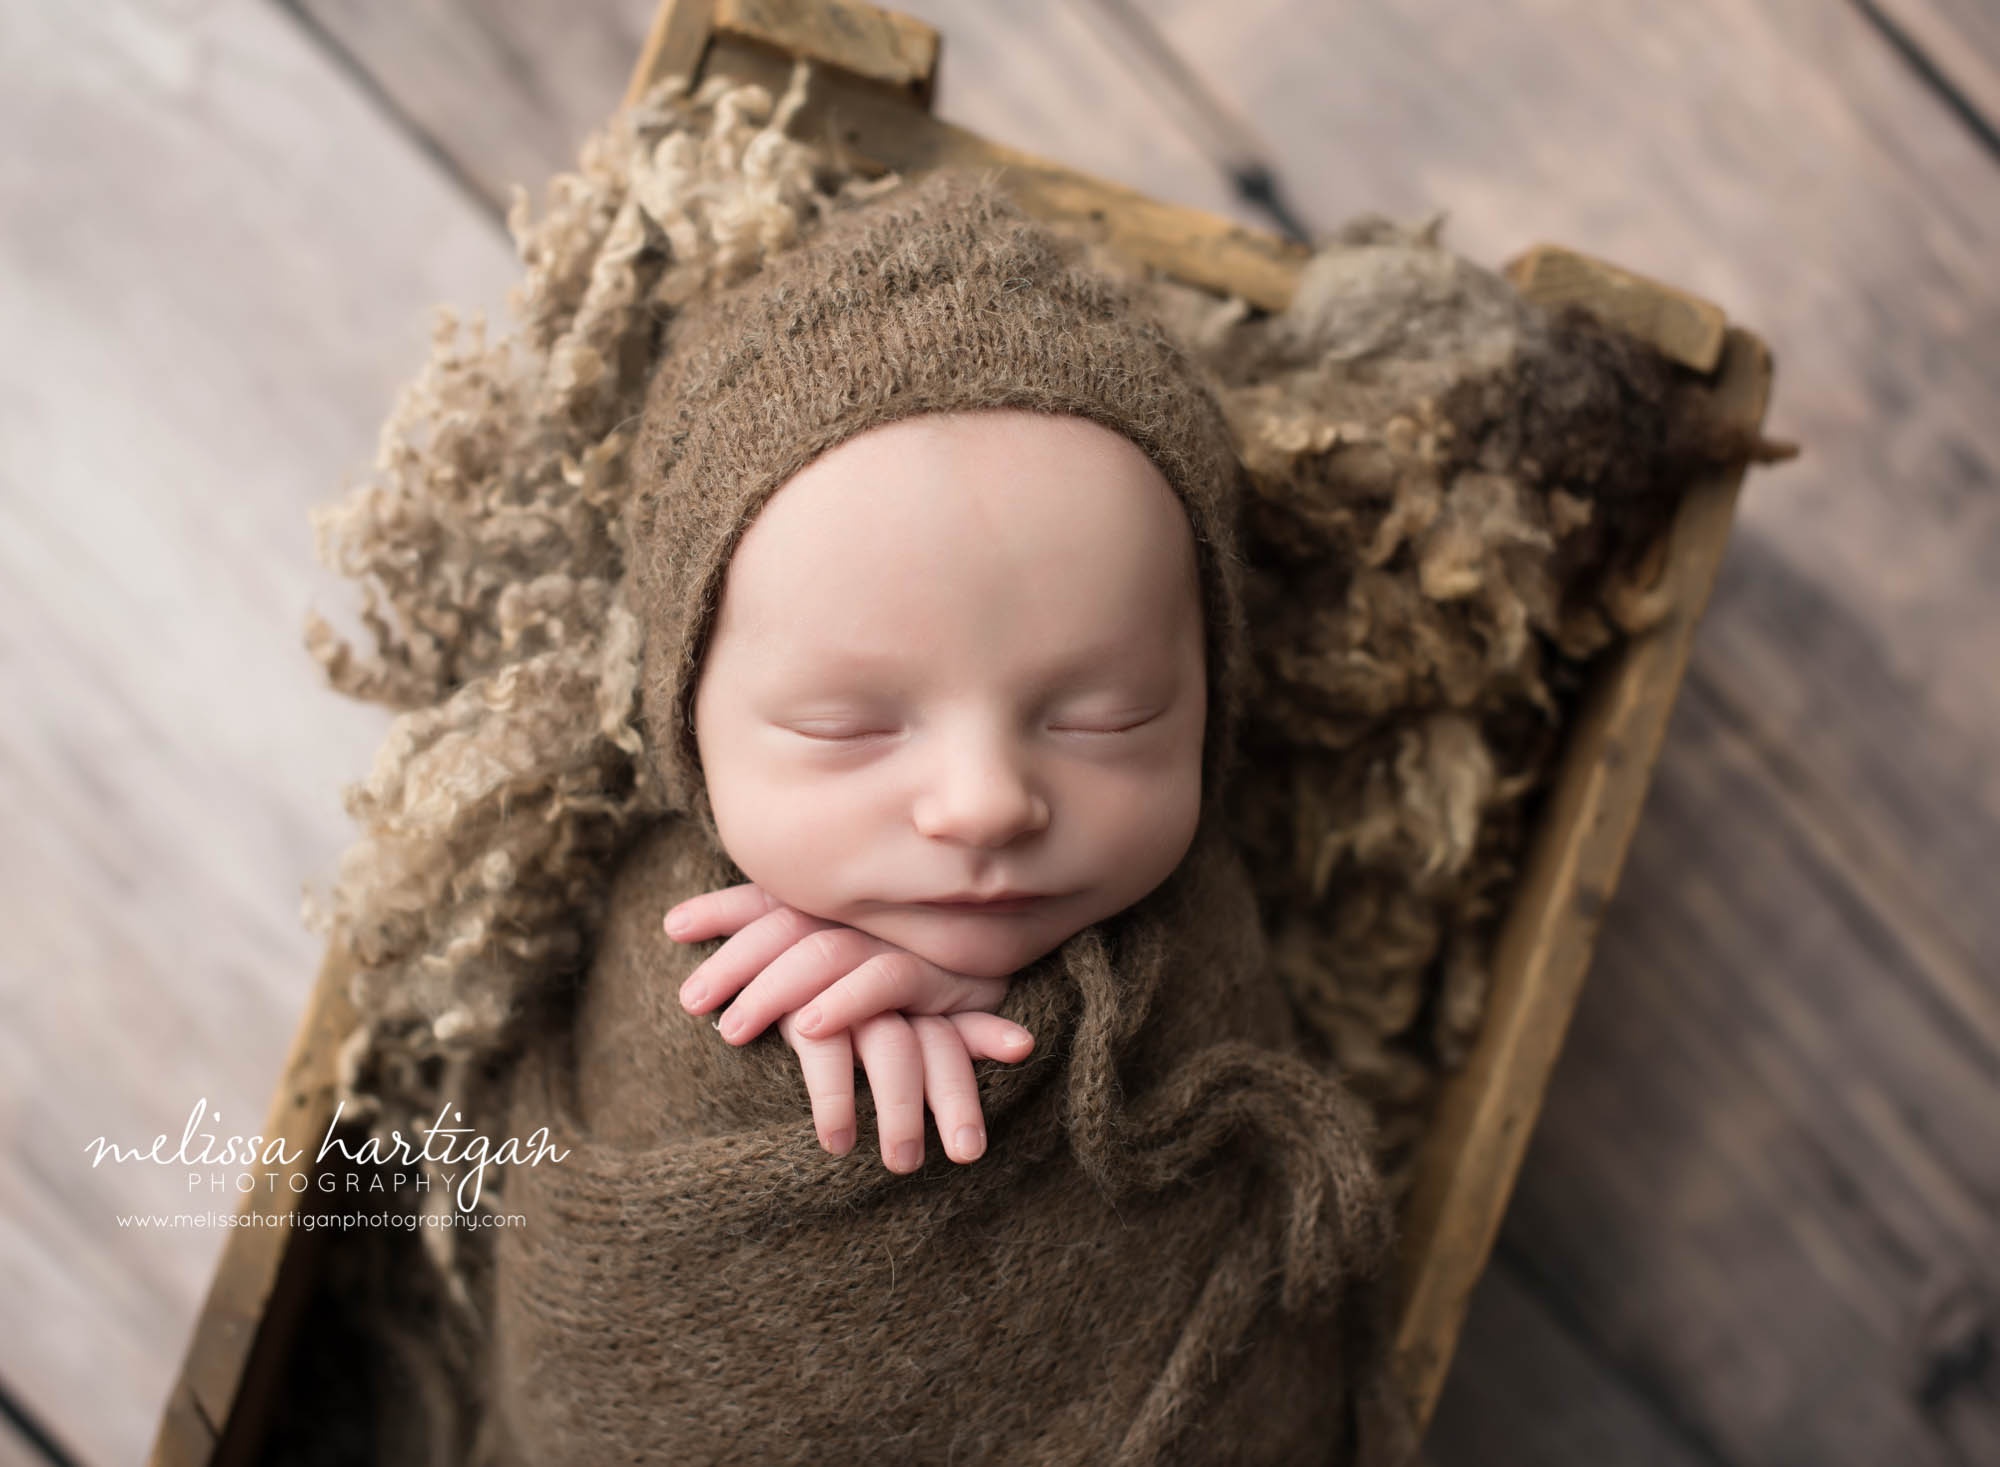 Melissa Hartigan Photography CT Newborn Photographer Stafford baby boy sleeping in wooden crate wrapped in brown blanket and matching knit hat with hands sticking out